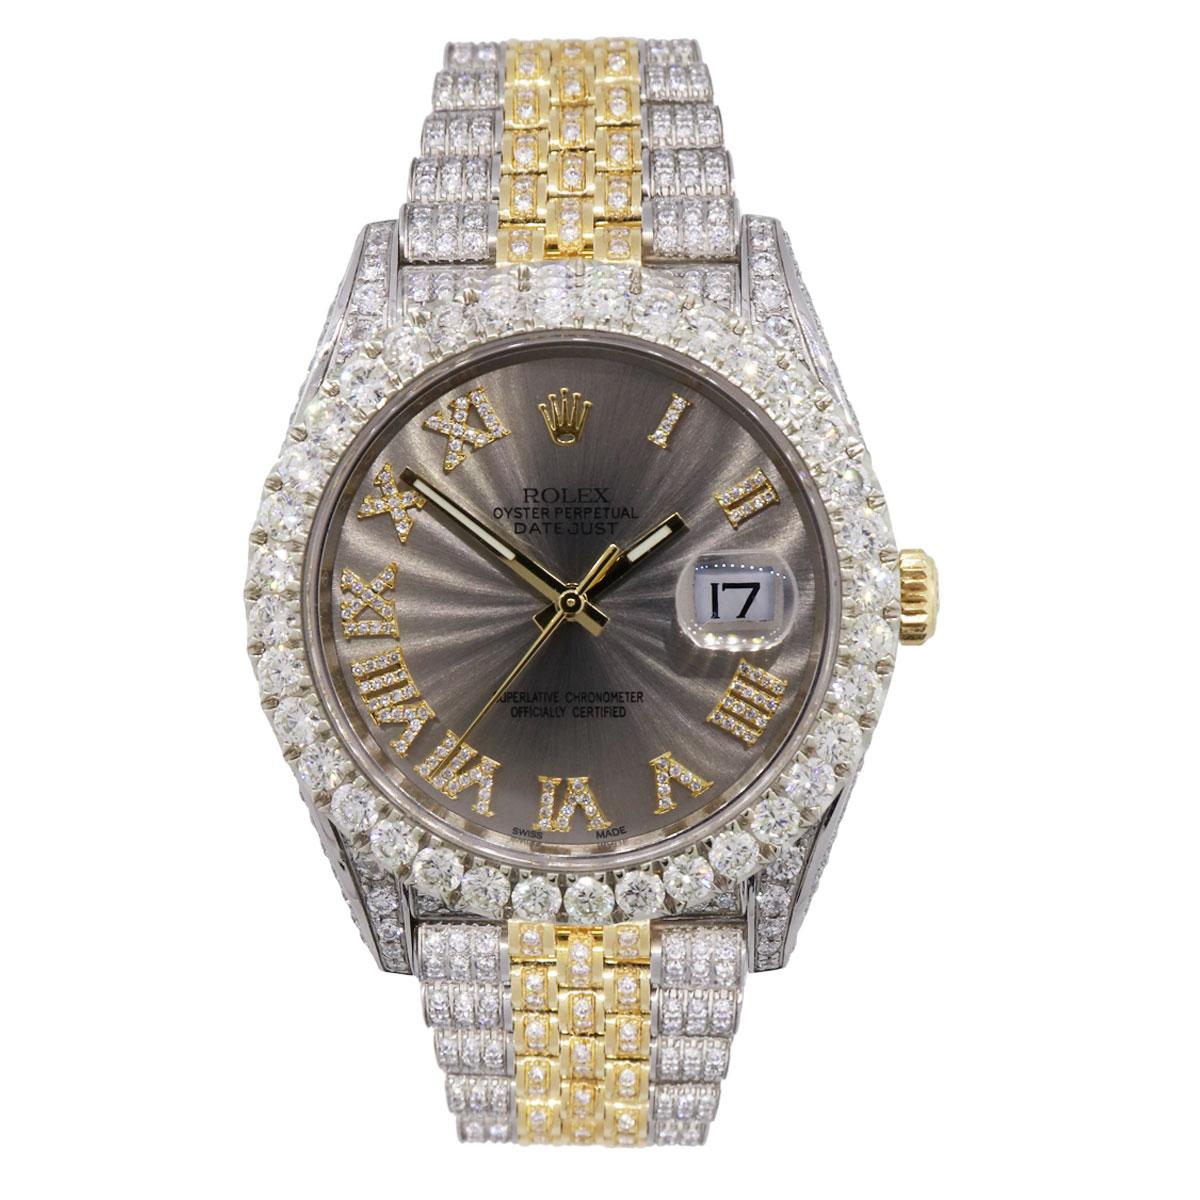 Brand: Rolex
MPN: 126303
Model: Datejust
Case Material: Stainless steel and diamonds
Case Diameter: 41mm
Crystal: Sapphire crystal (scratch resistant)
Bezel: Diamond bezel (aftermarket)
Dial: Silver roman dial with diamond hour markers